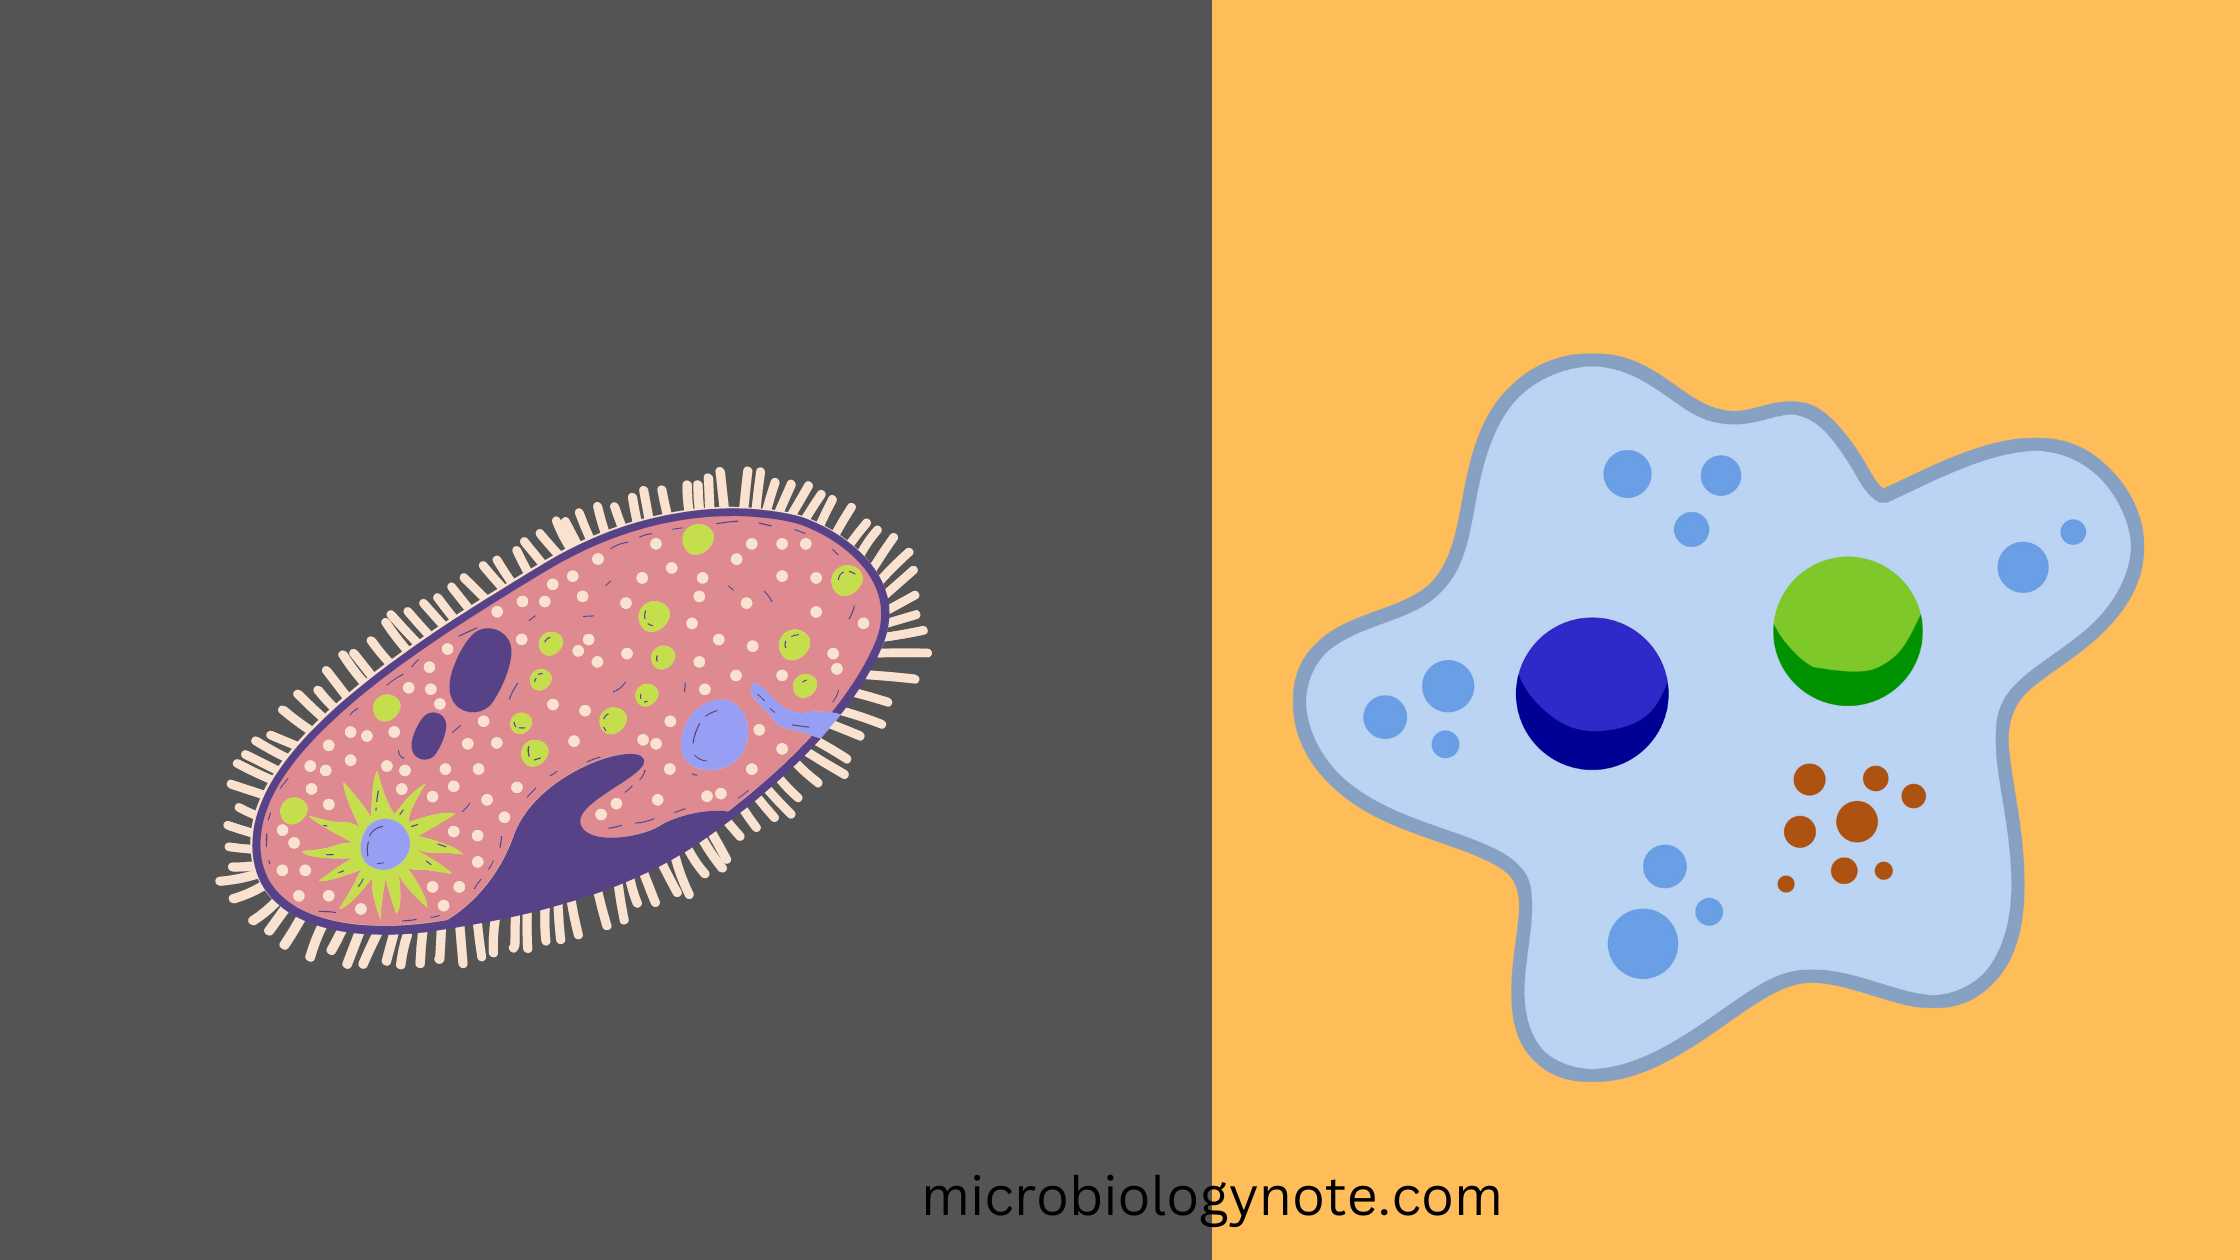 Difference Between Multicellular and Unicellular Organisms